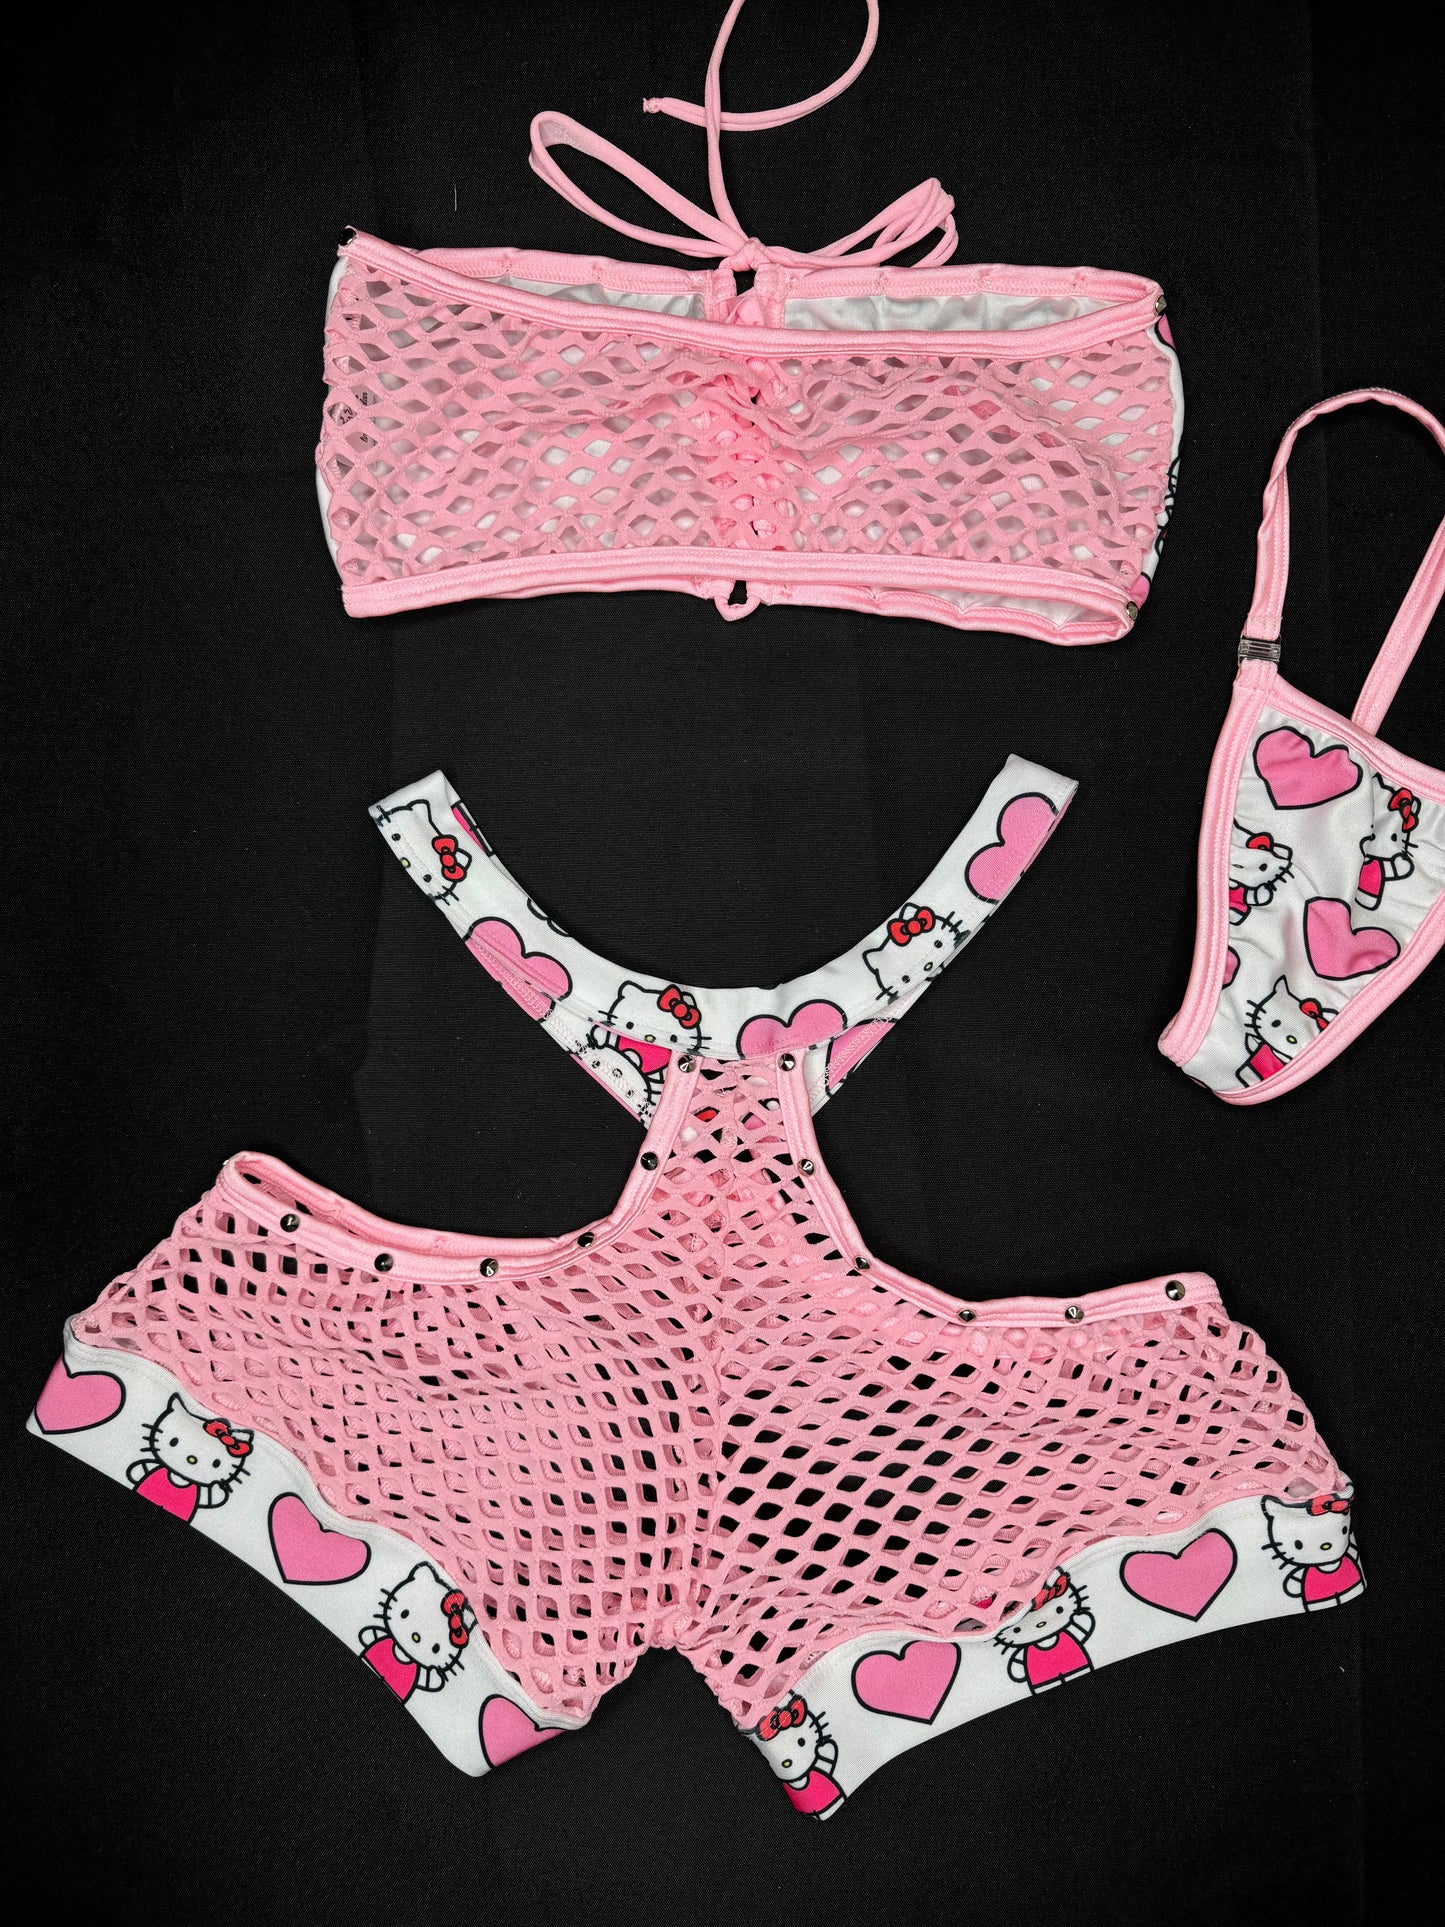 Baby Pink Kitty Hearts Two-Piece Lingerie Outfit